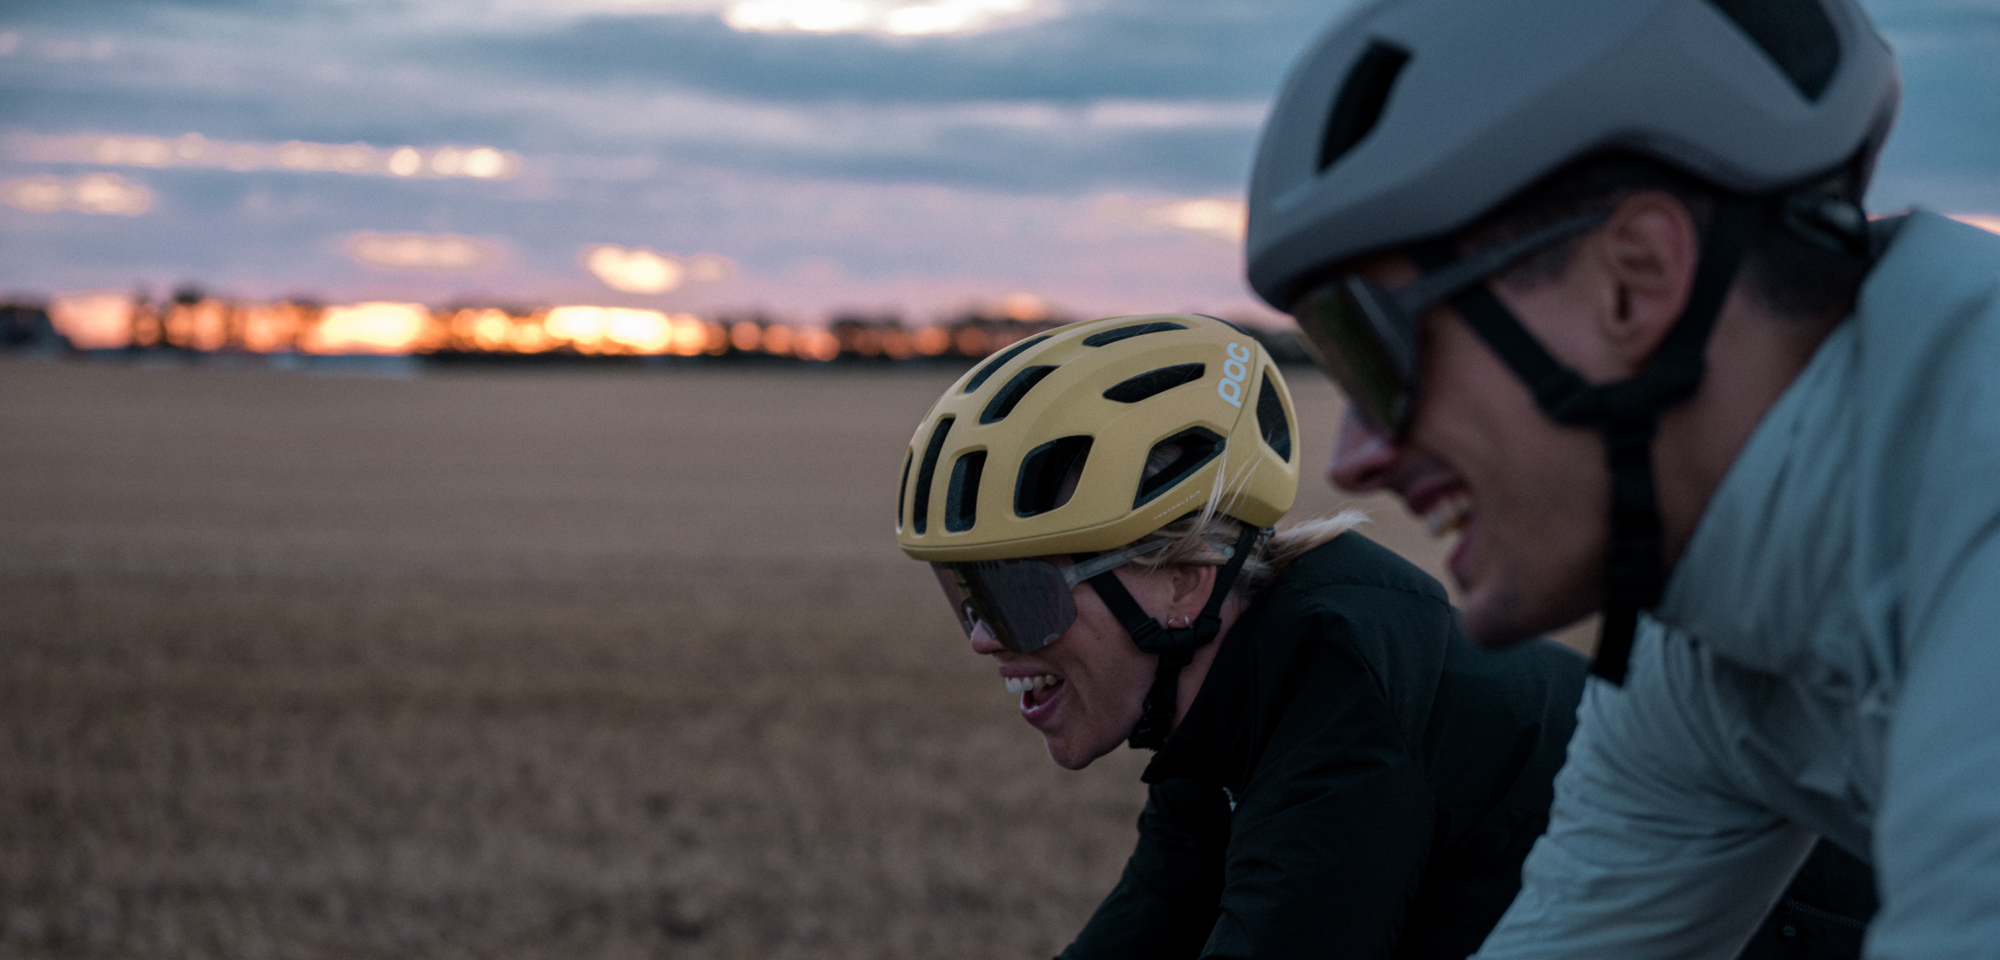 image of women and man riding wearing POC helmets and sunglasses